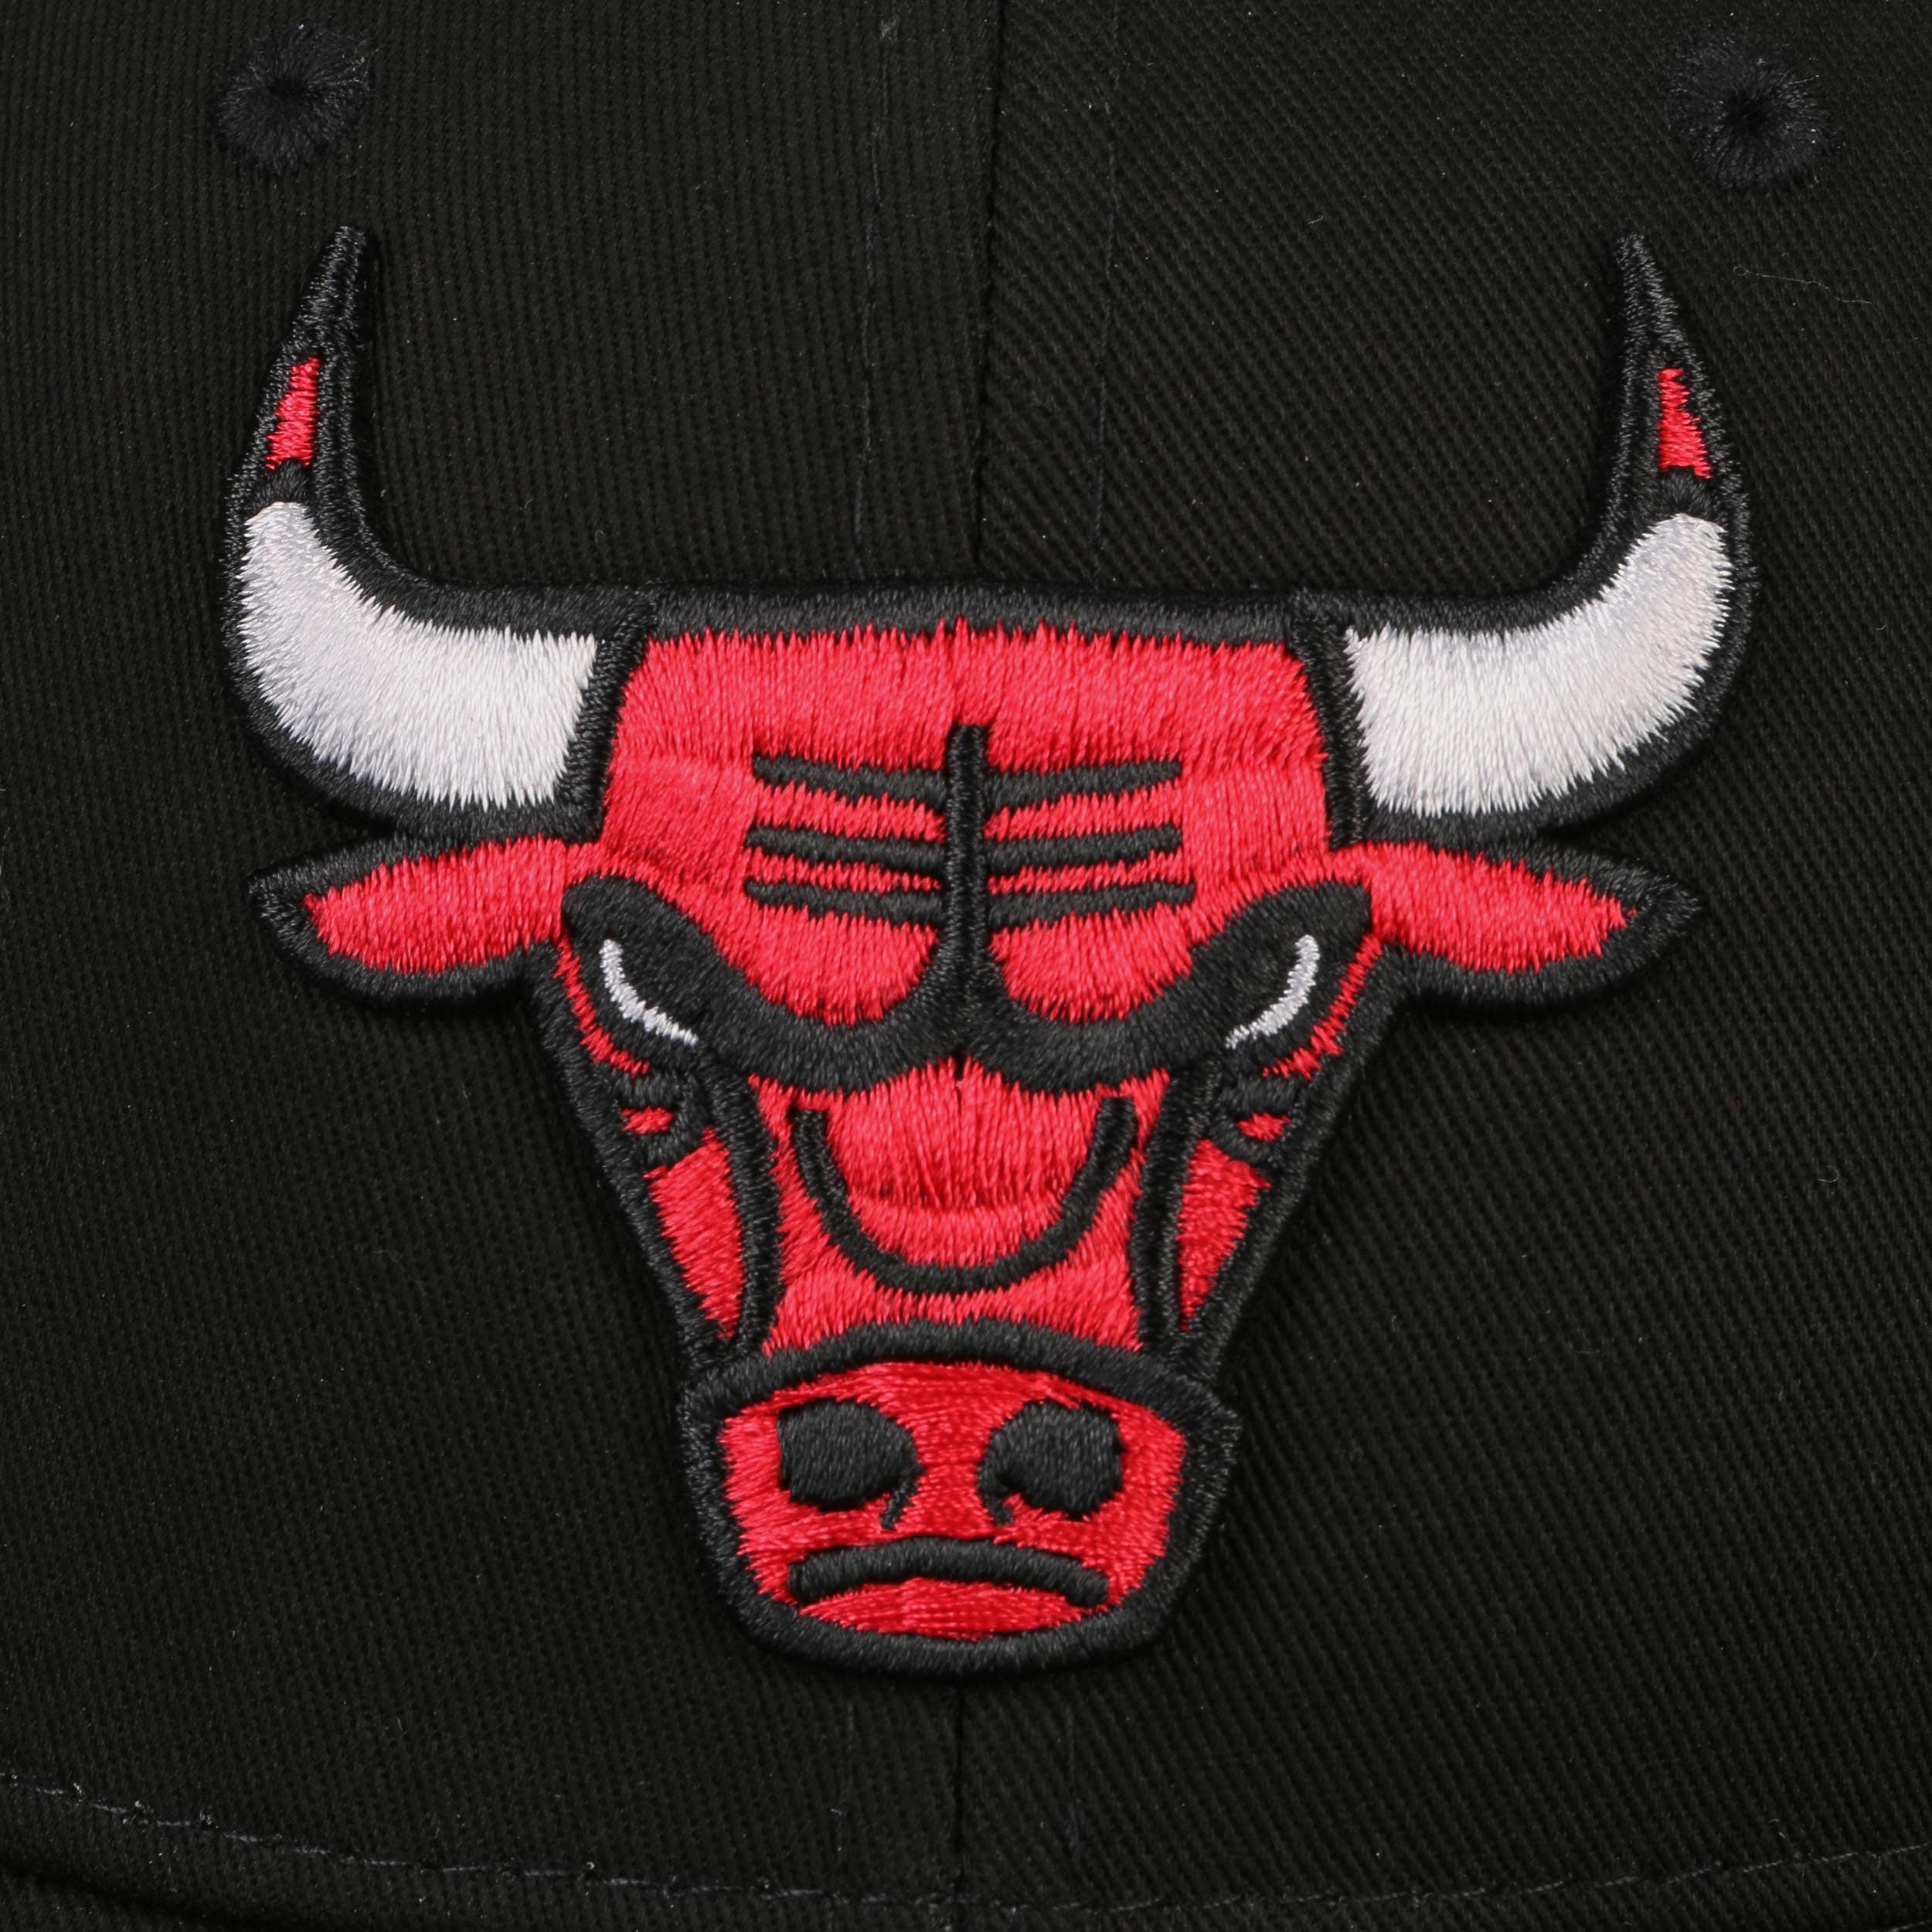 Low Profile Bulls Cap by Mitchell & Ness - 26,95